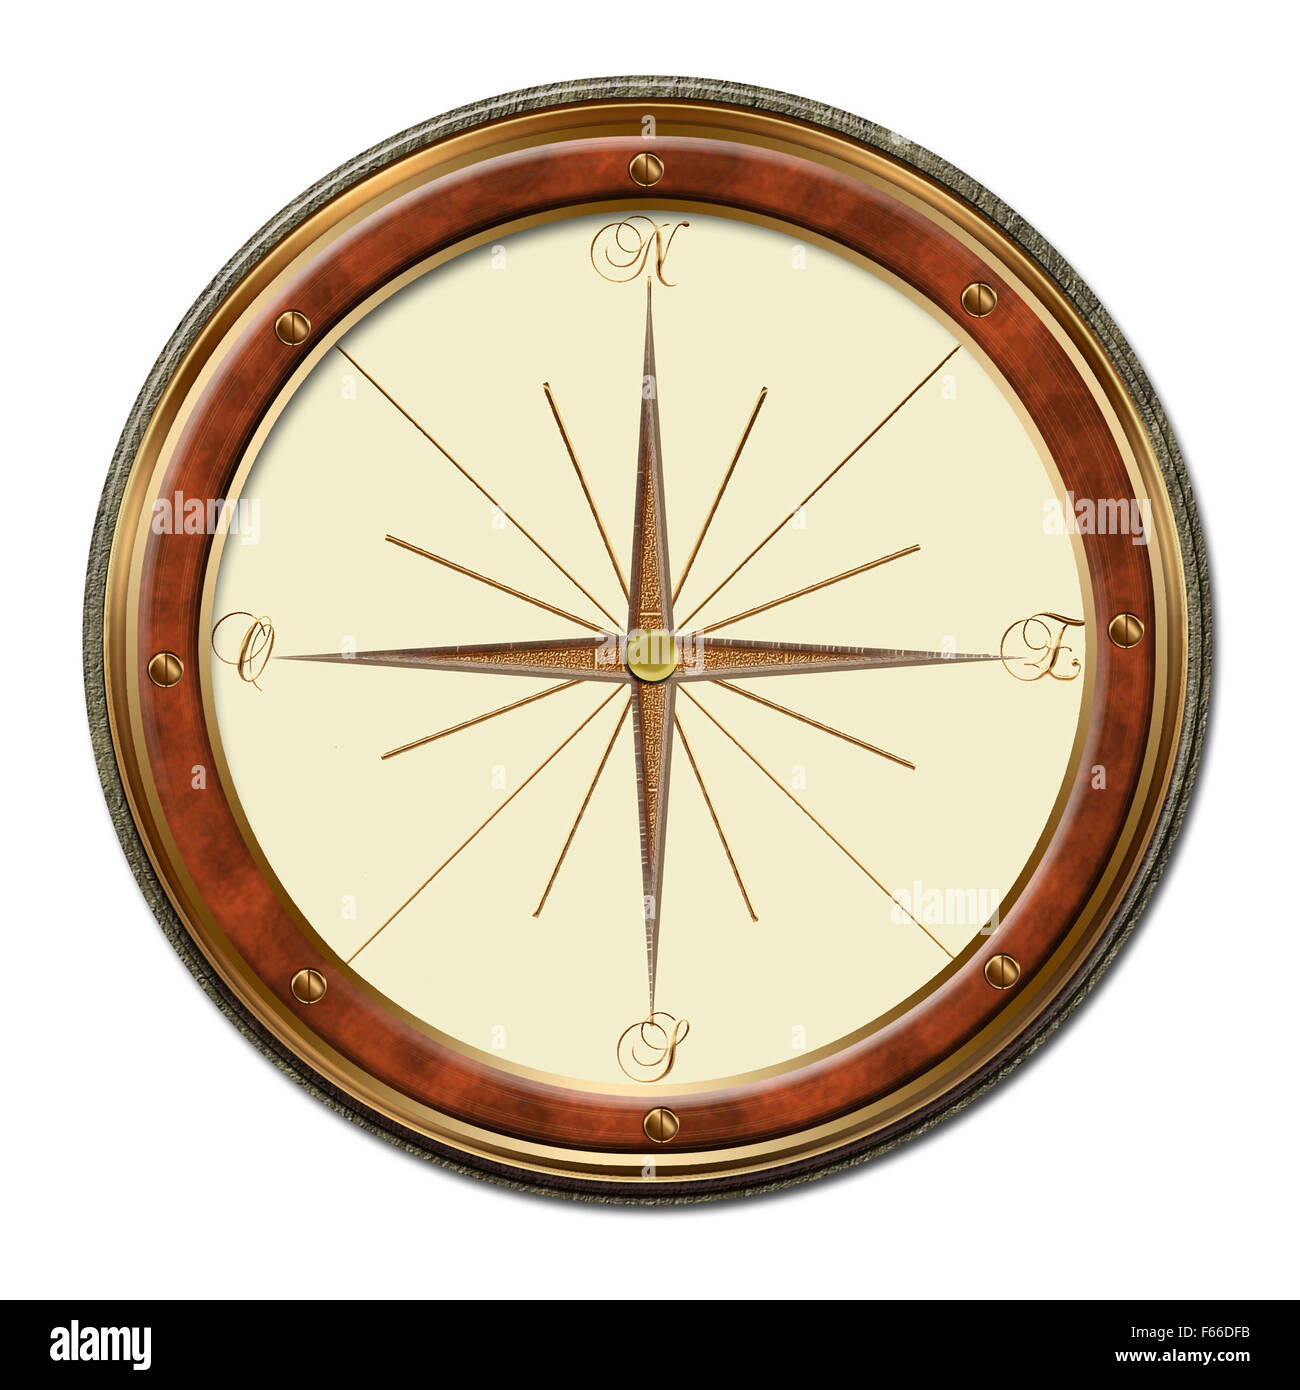 a digitaly made compass, with a wooden and copper rim on a white background Stock Photo